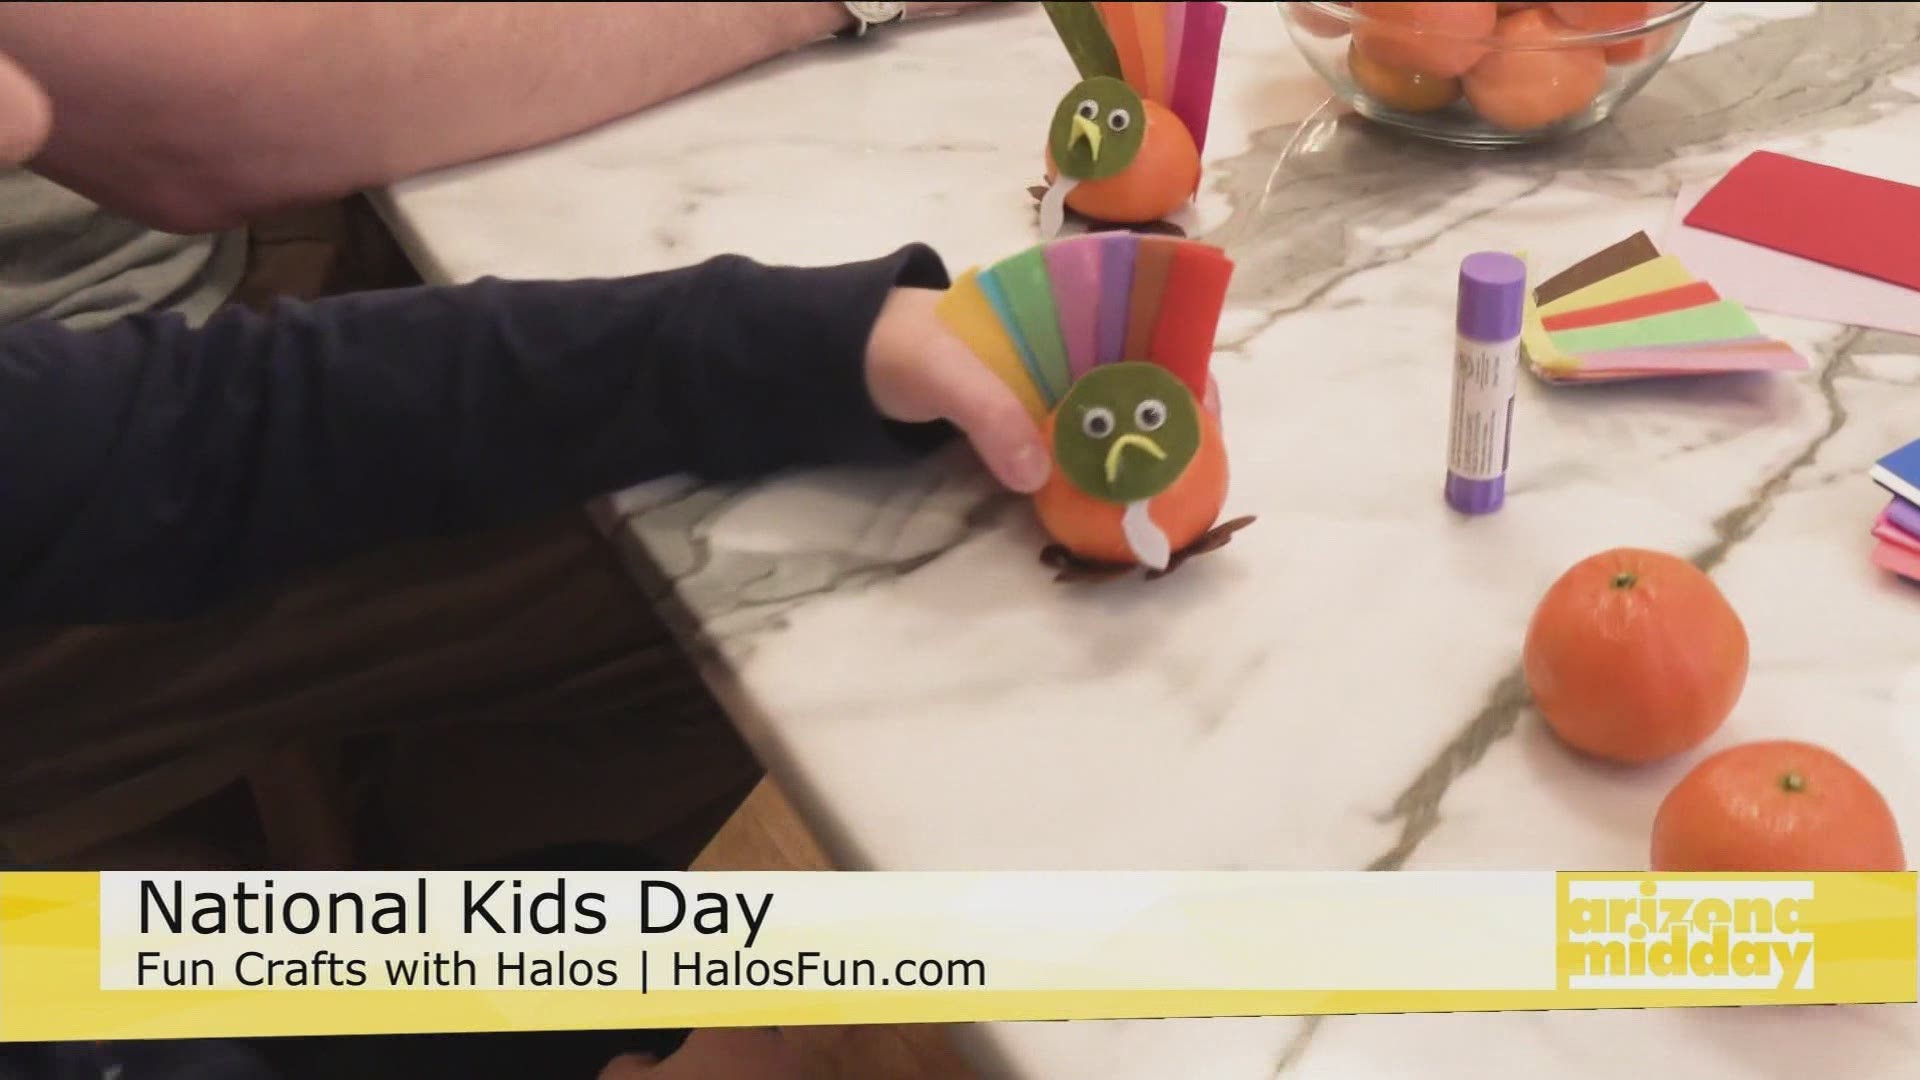 Lifestyle Editor Joanne Butler has some fun food crafts for kids just in time for National Kids Day.